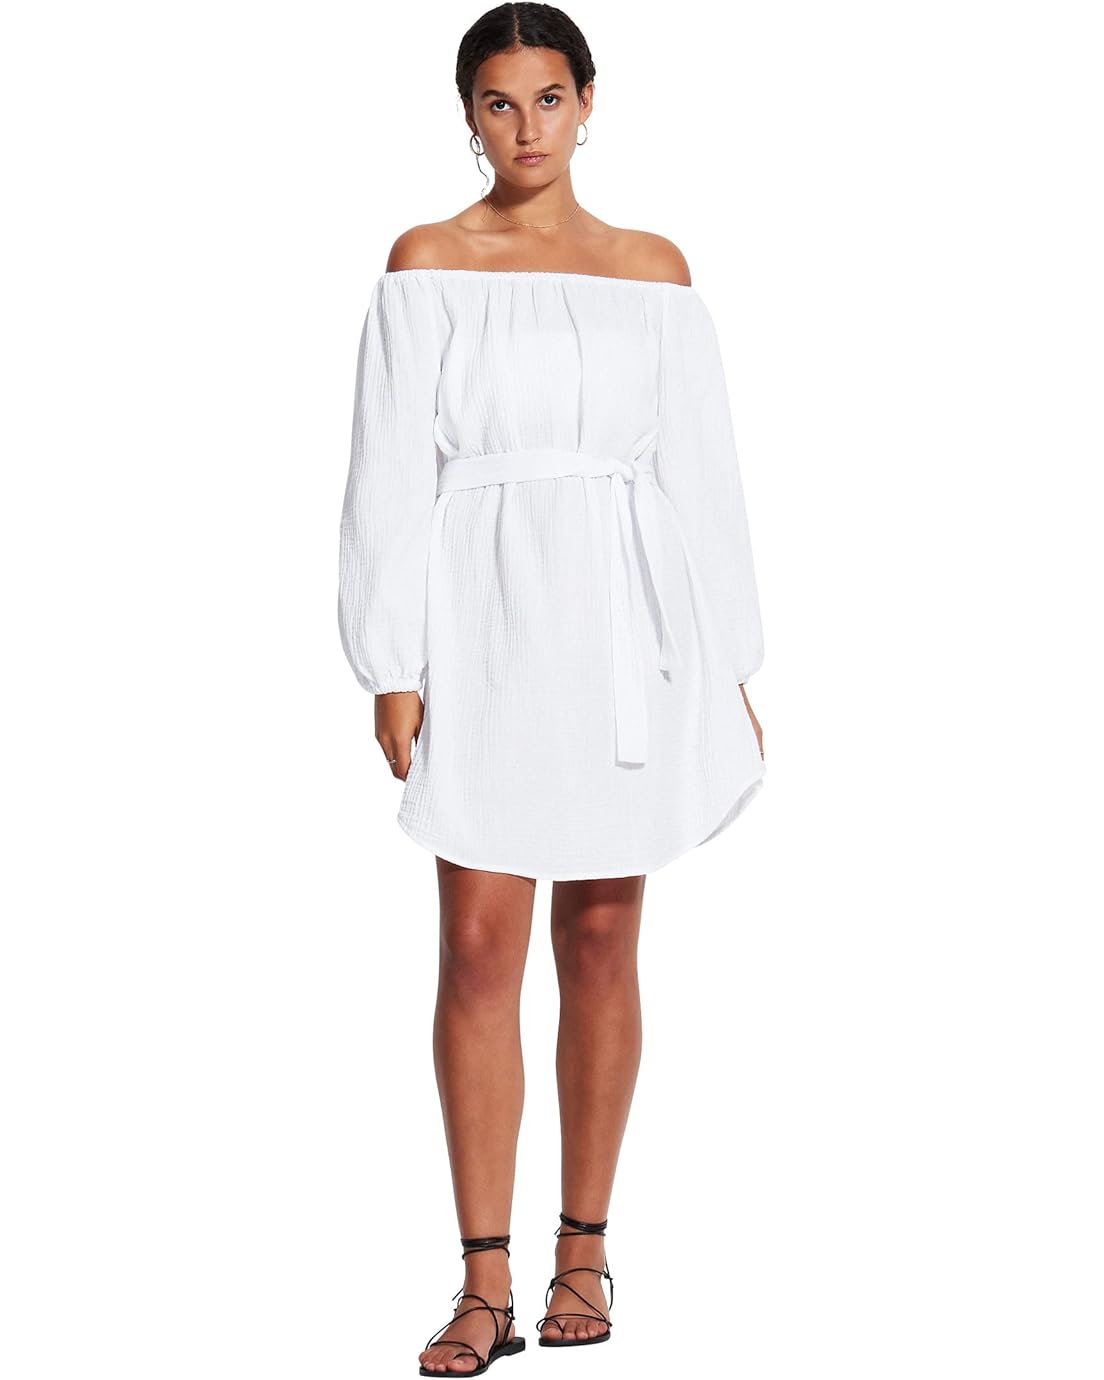 Seafolly Double Cloth Summer Cover-Up